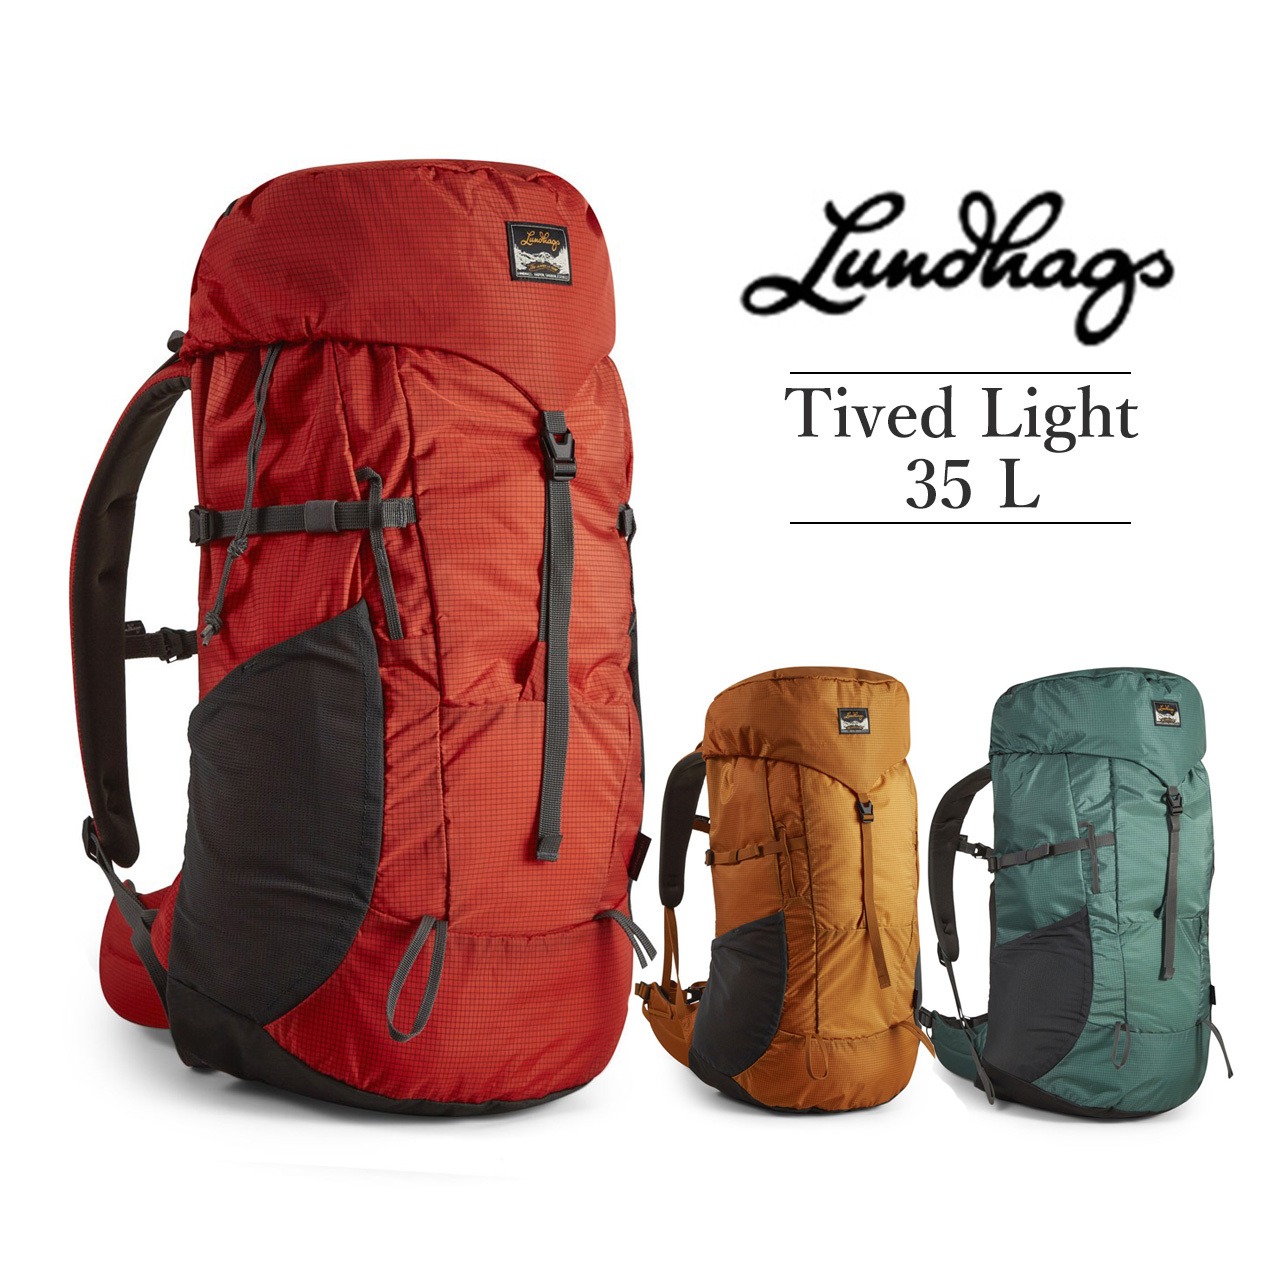 Lundhags 北欧生まれの 高機能 防水 バックパック Tived Light 35 L